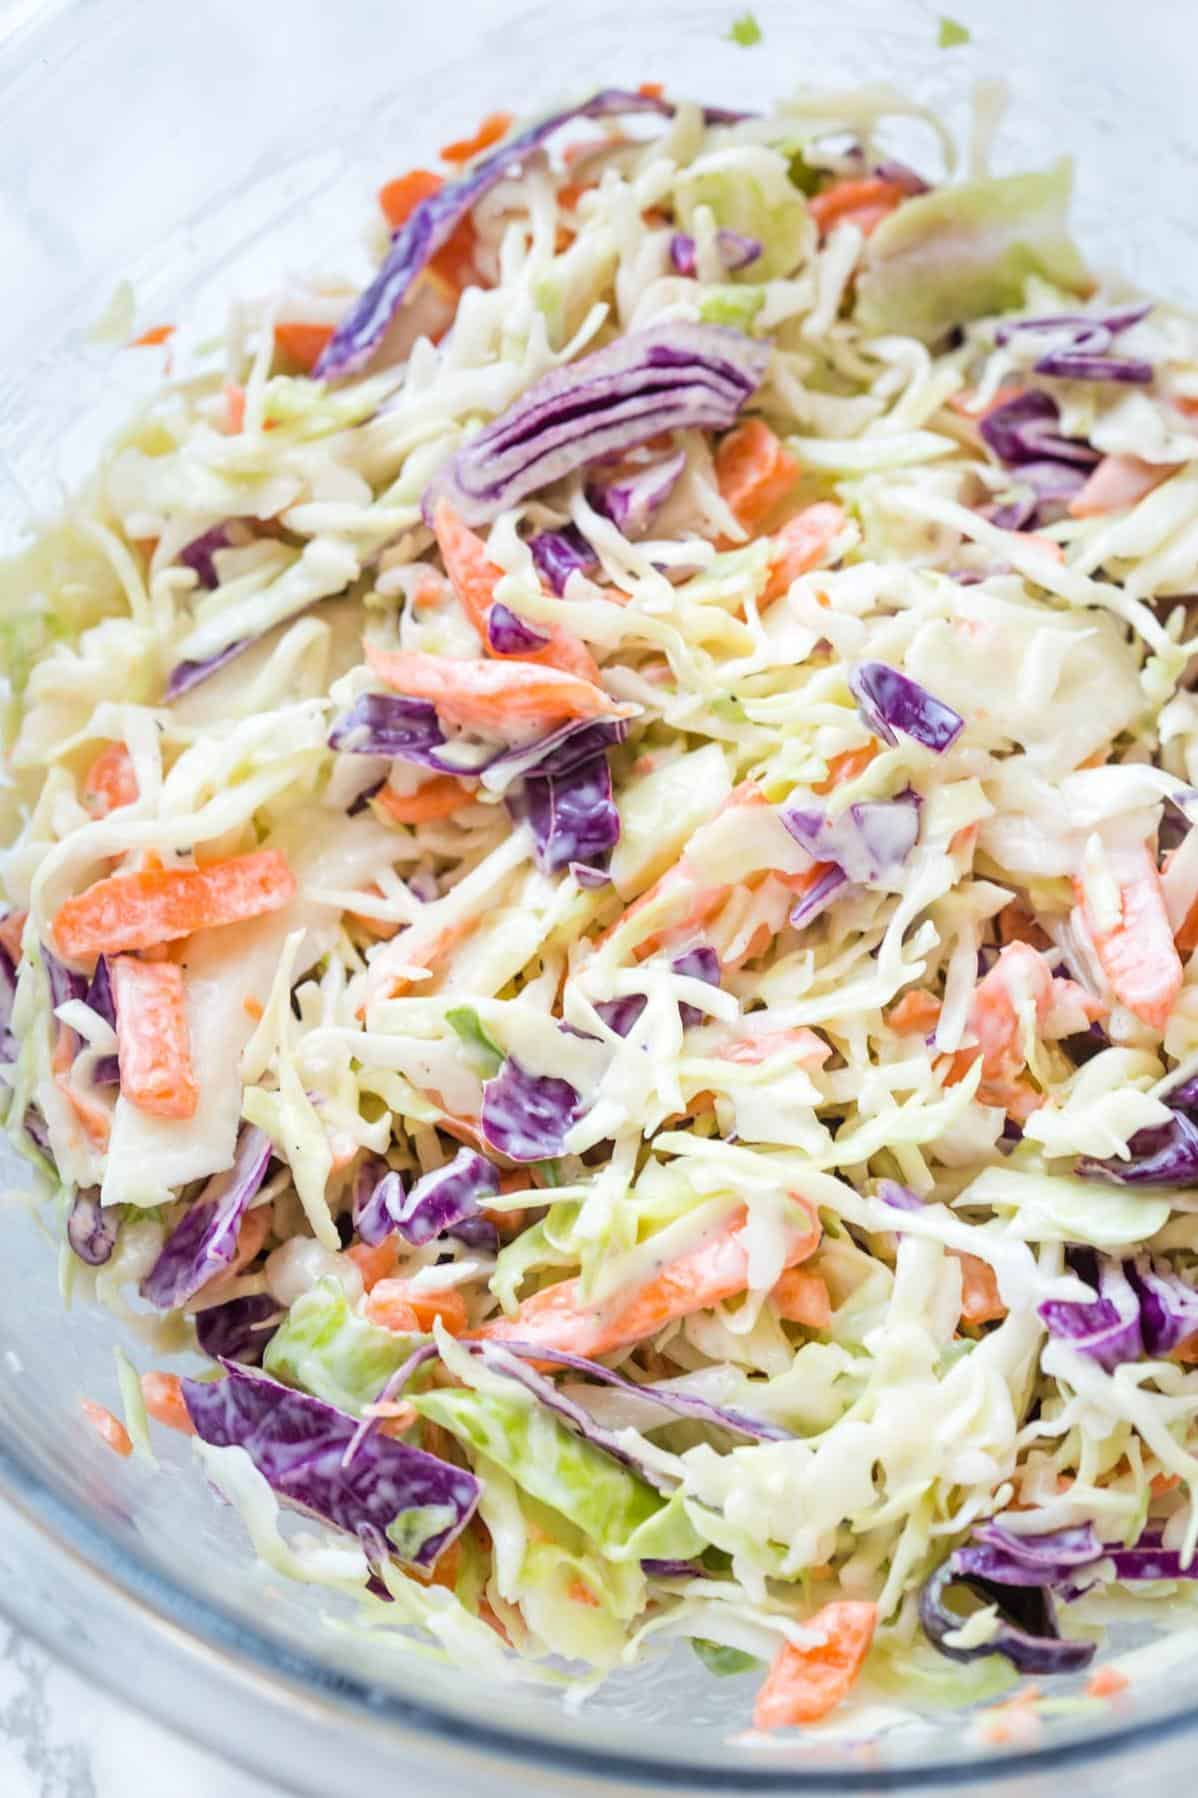  This salad is a must-have at any BBQ or picnic.